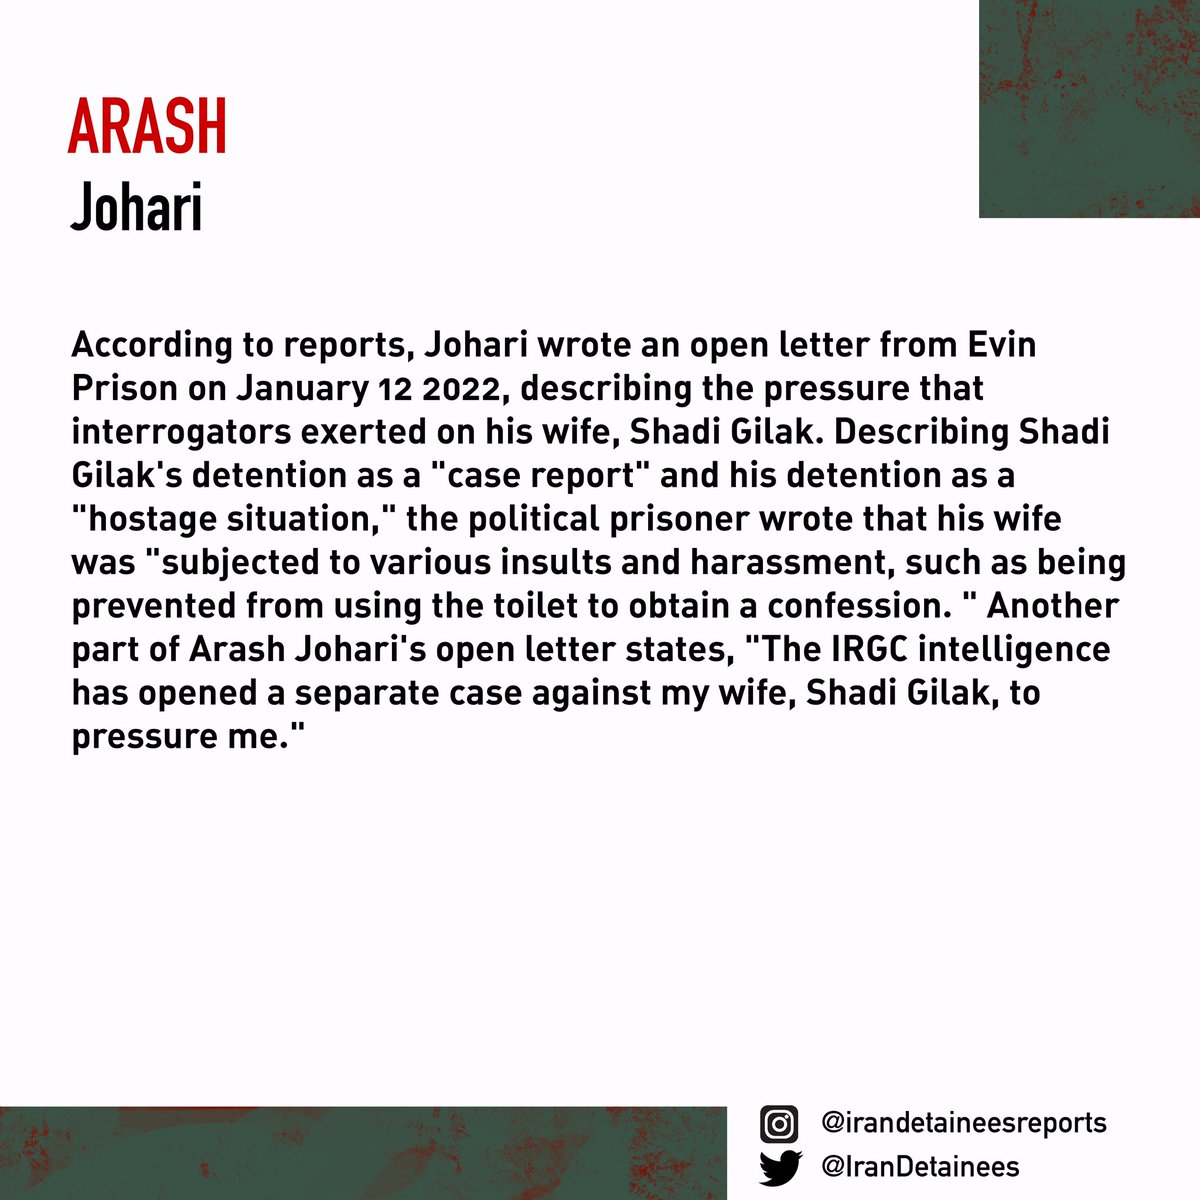 #ArashJohari,a labour rights activist, was sentenced to 7 years and 6 months in prison for his activities related to workers' rights.He wrote an open letter from Evin Prison, describing the pressure that interrogators exerted on his wife #ShadiGilak
#آرش_جوهری
#شادی_گیلک
@amnesty